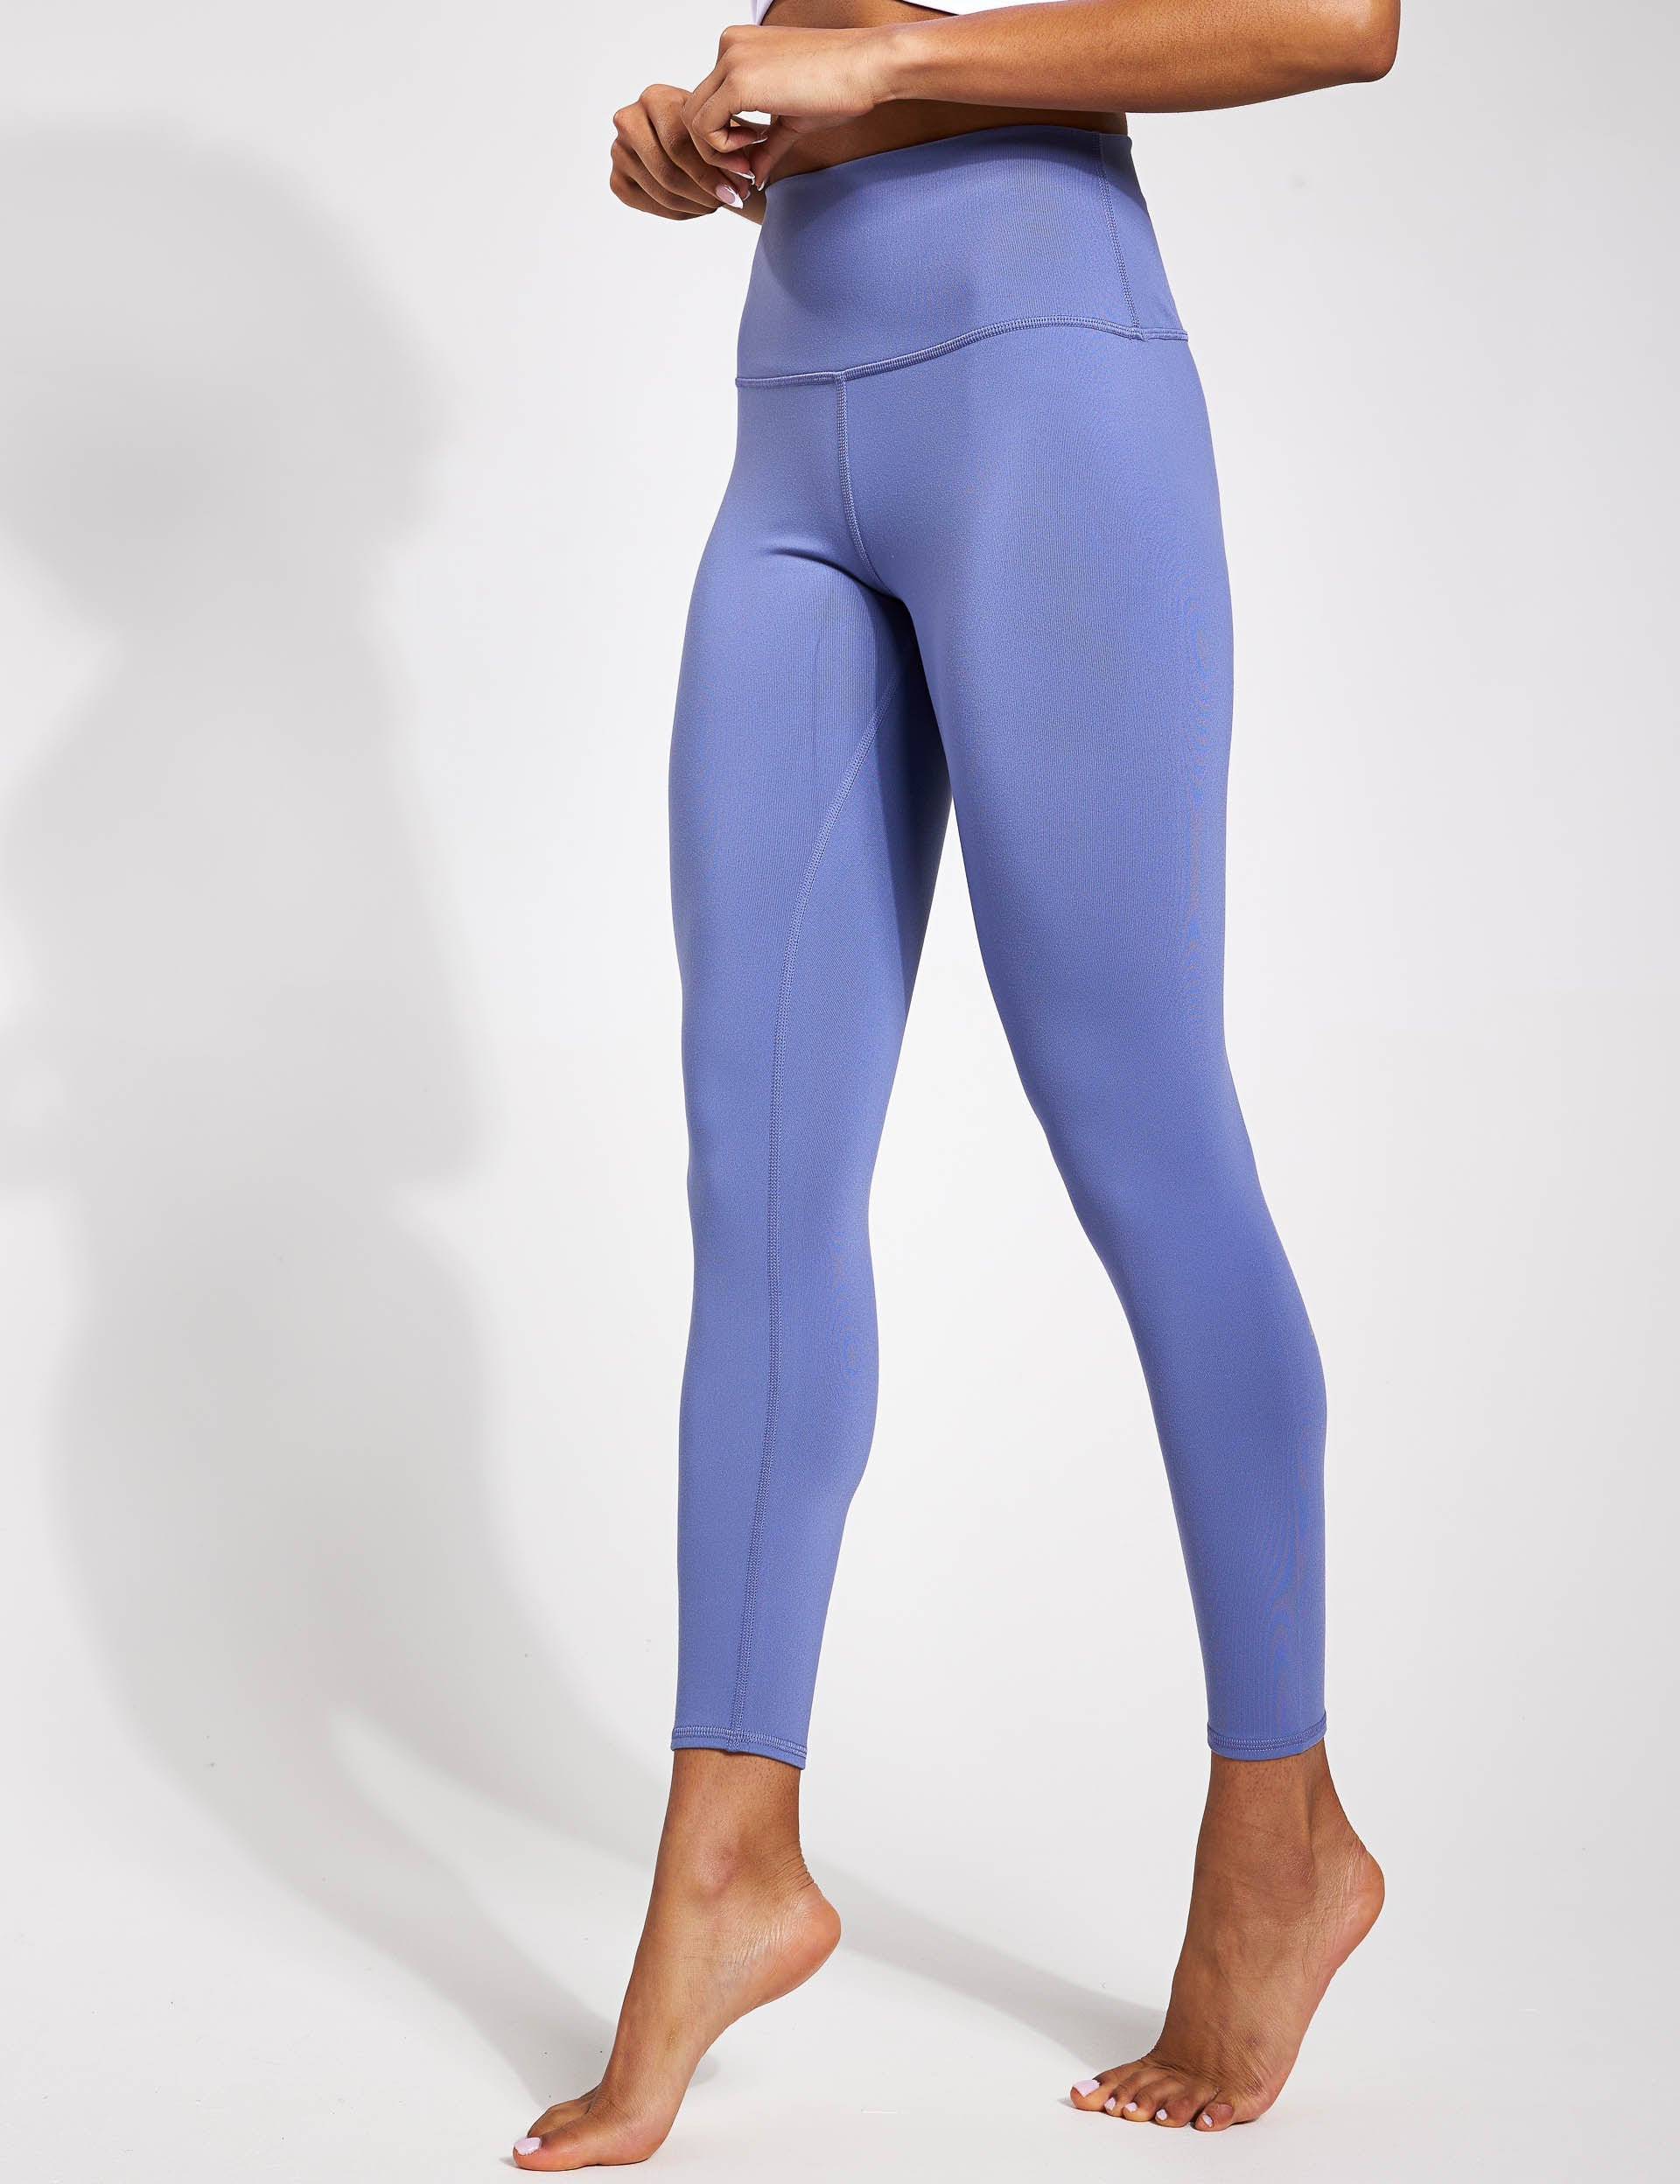 Lululemon - Fast & Free 7/8 Tight II in Moroccan Blue.WANT